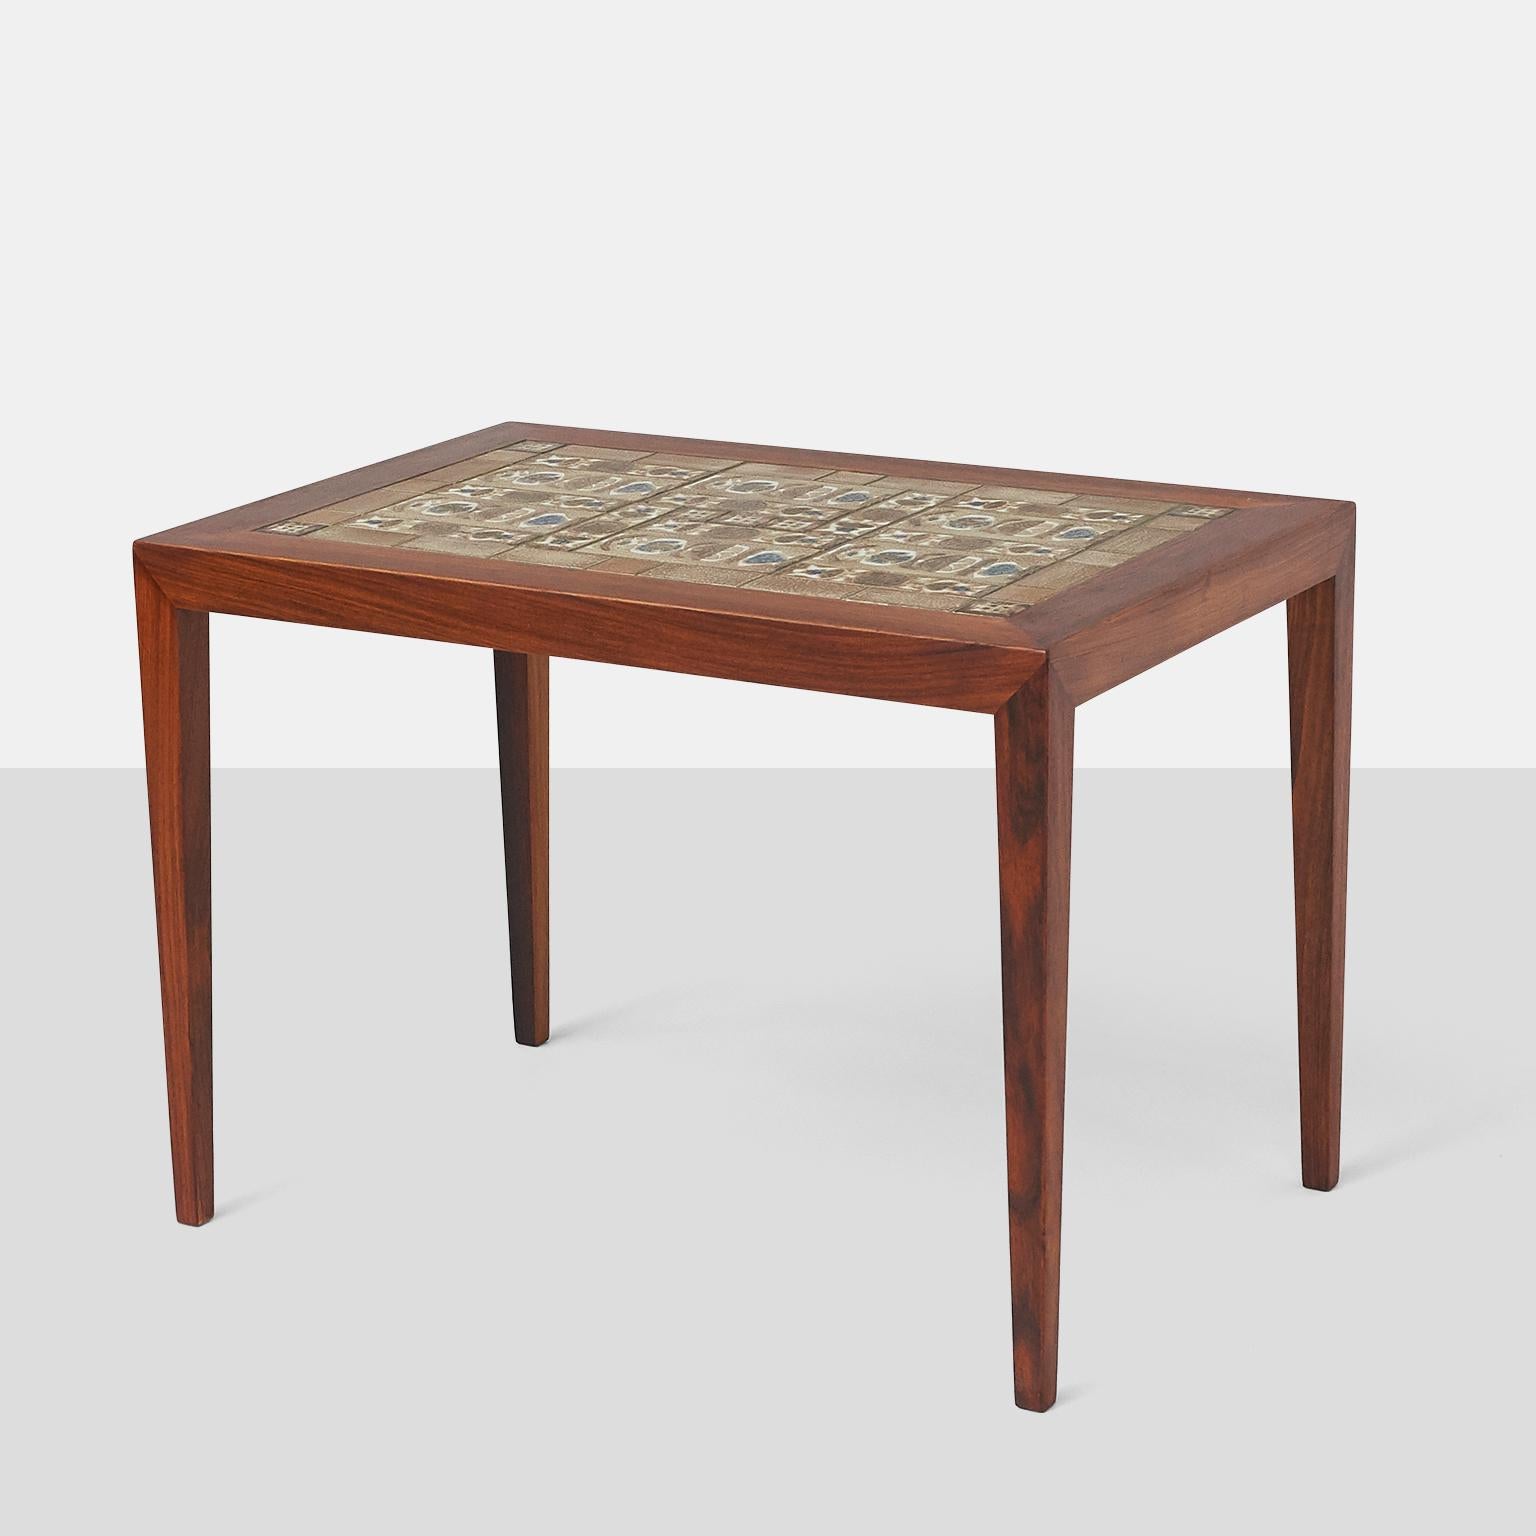 An end table in rosewood with inset ceramic tiles. Manufactured by Haslev Mobelfabrik, the tables were designed by Severin Hansen Jr and the tiles by Nils Thorsson.